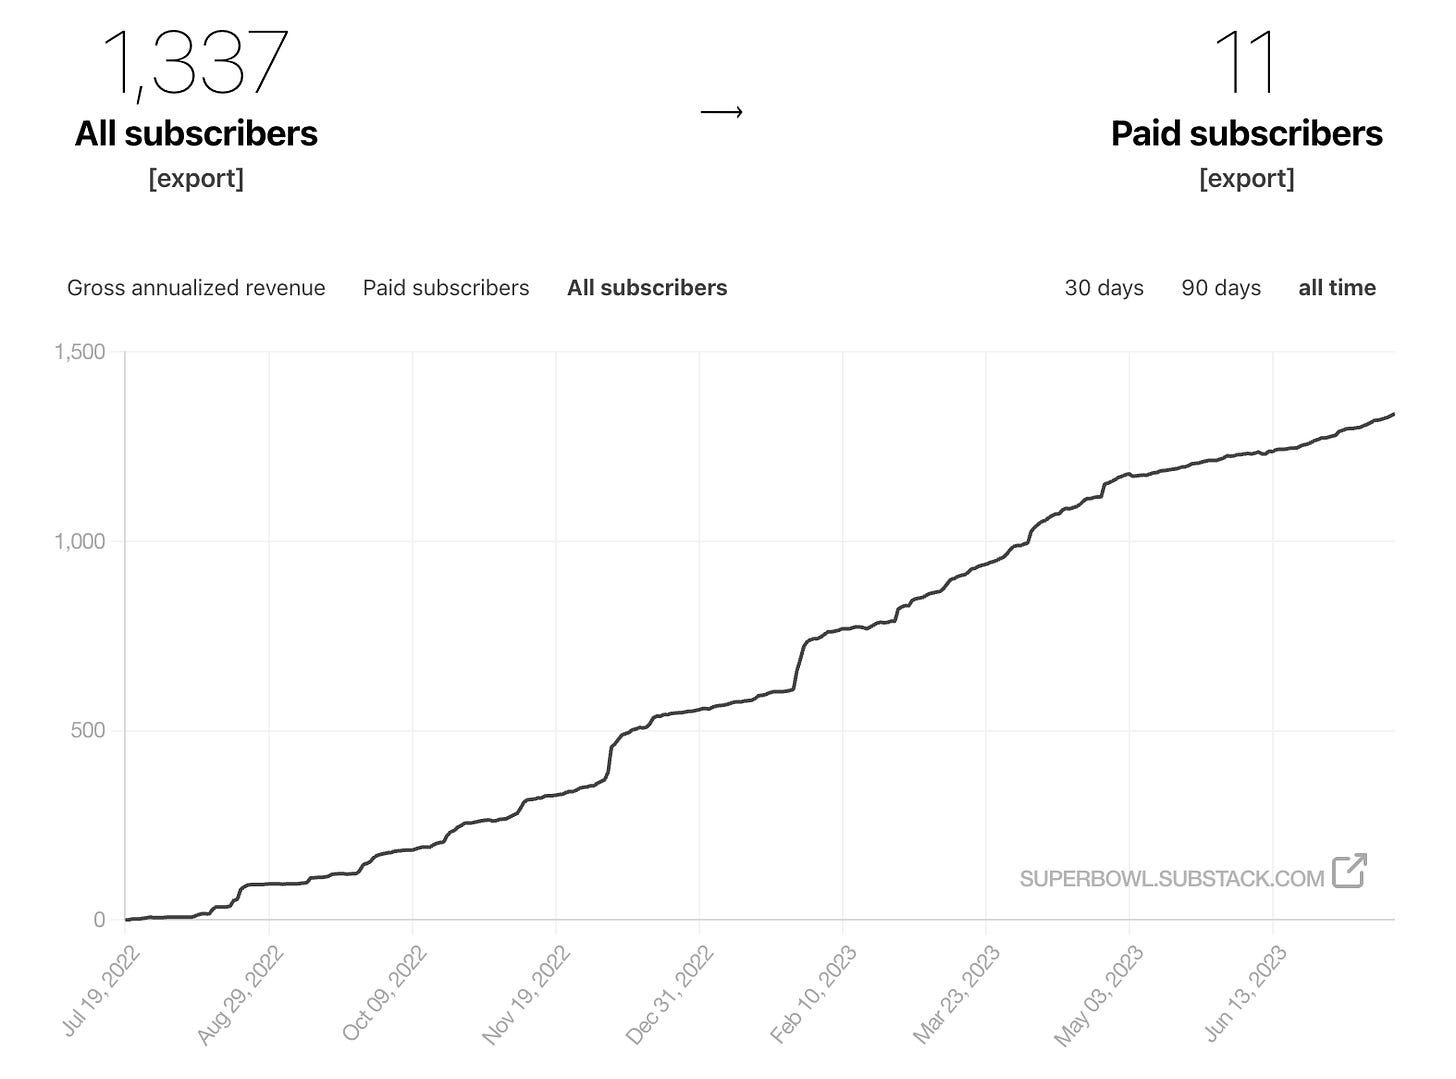 Graph showing Superb Owl subscriber count since inception. Currently at 1337 subscribers with 11 paid